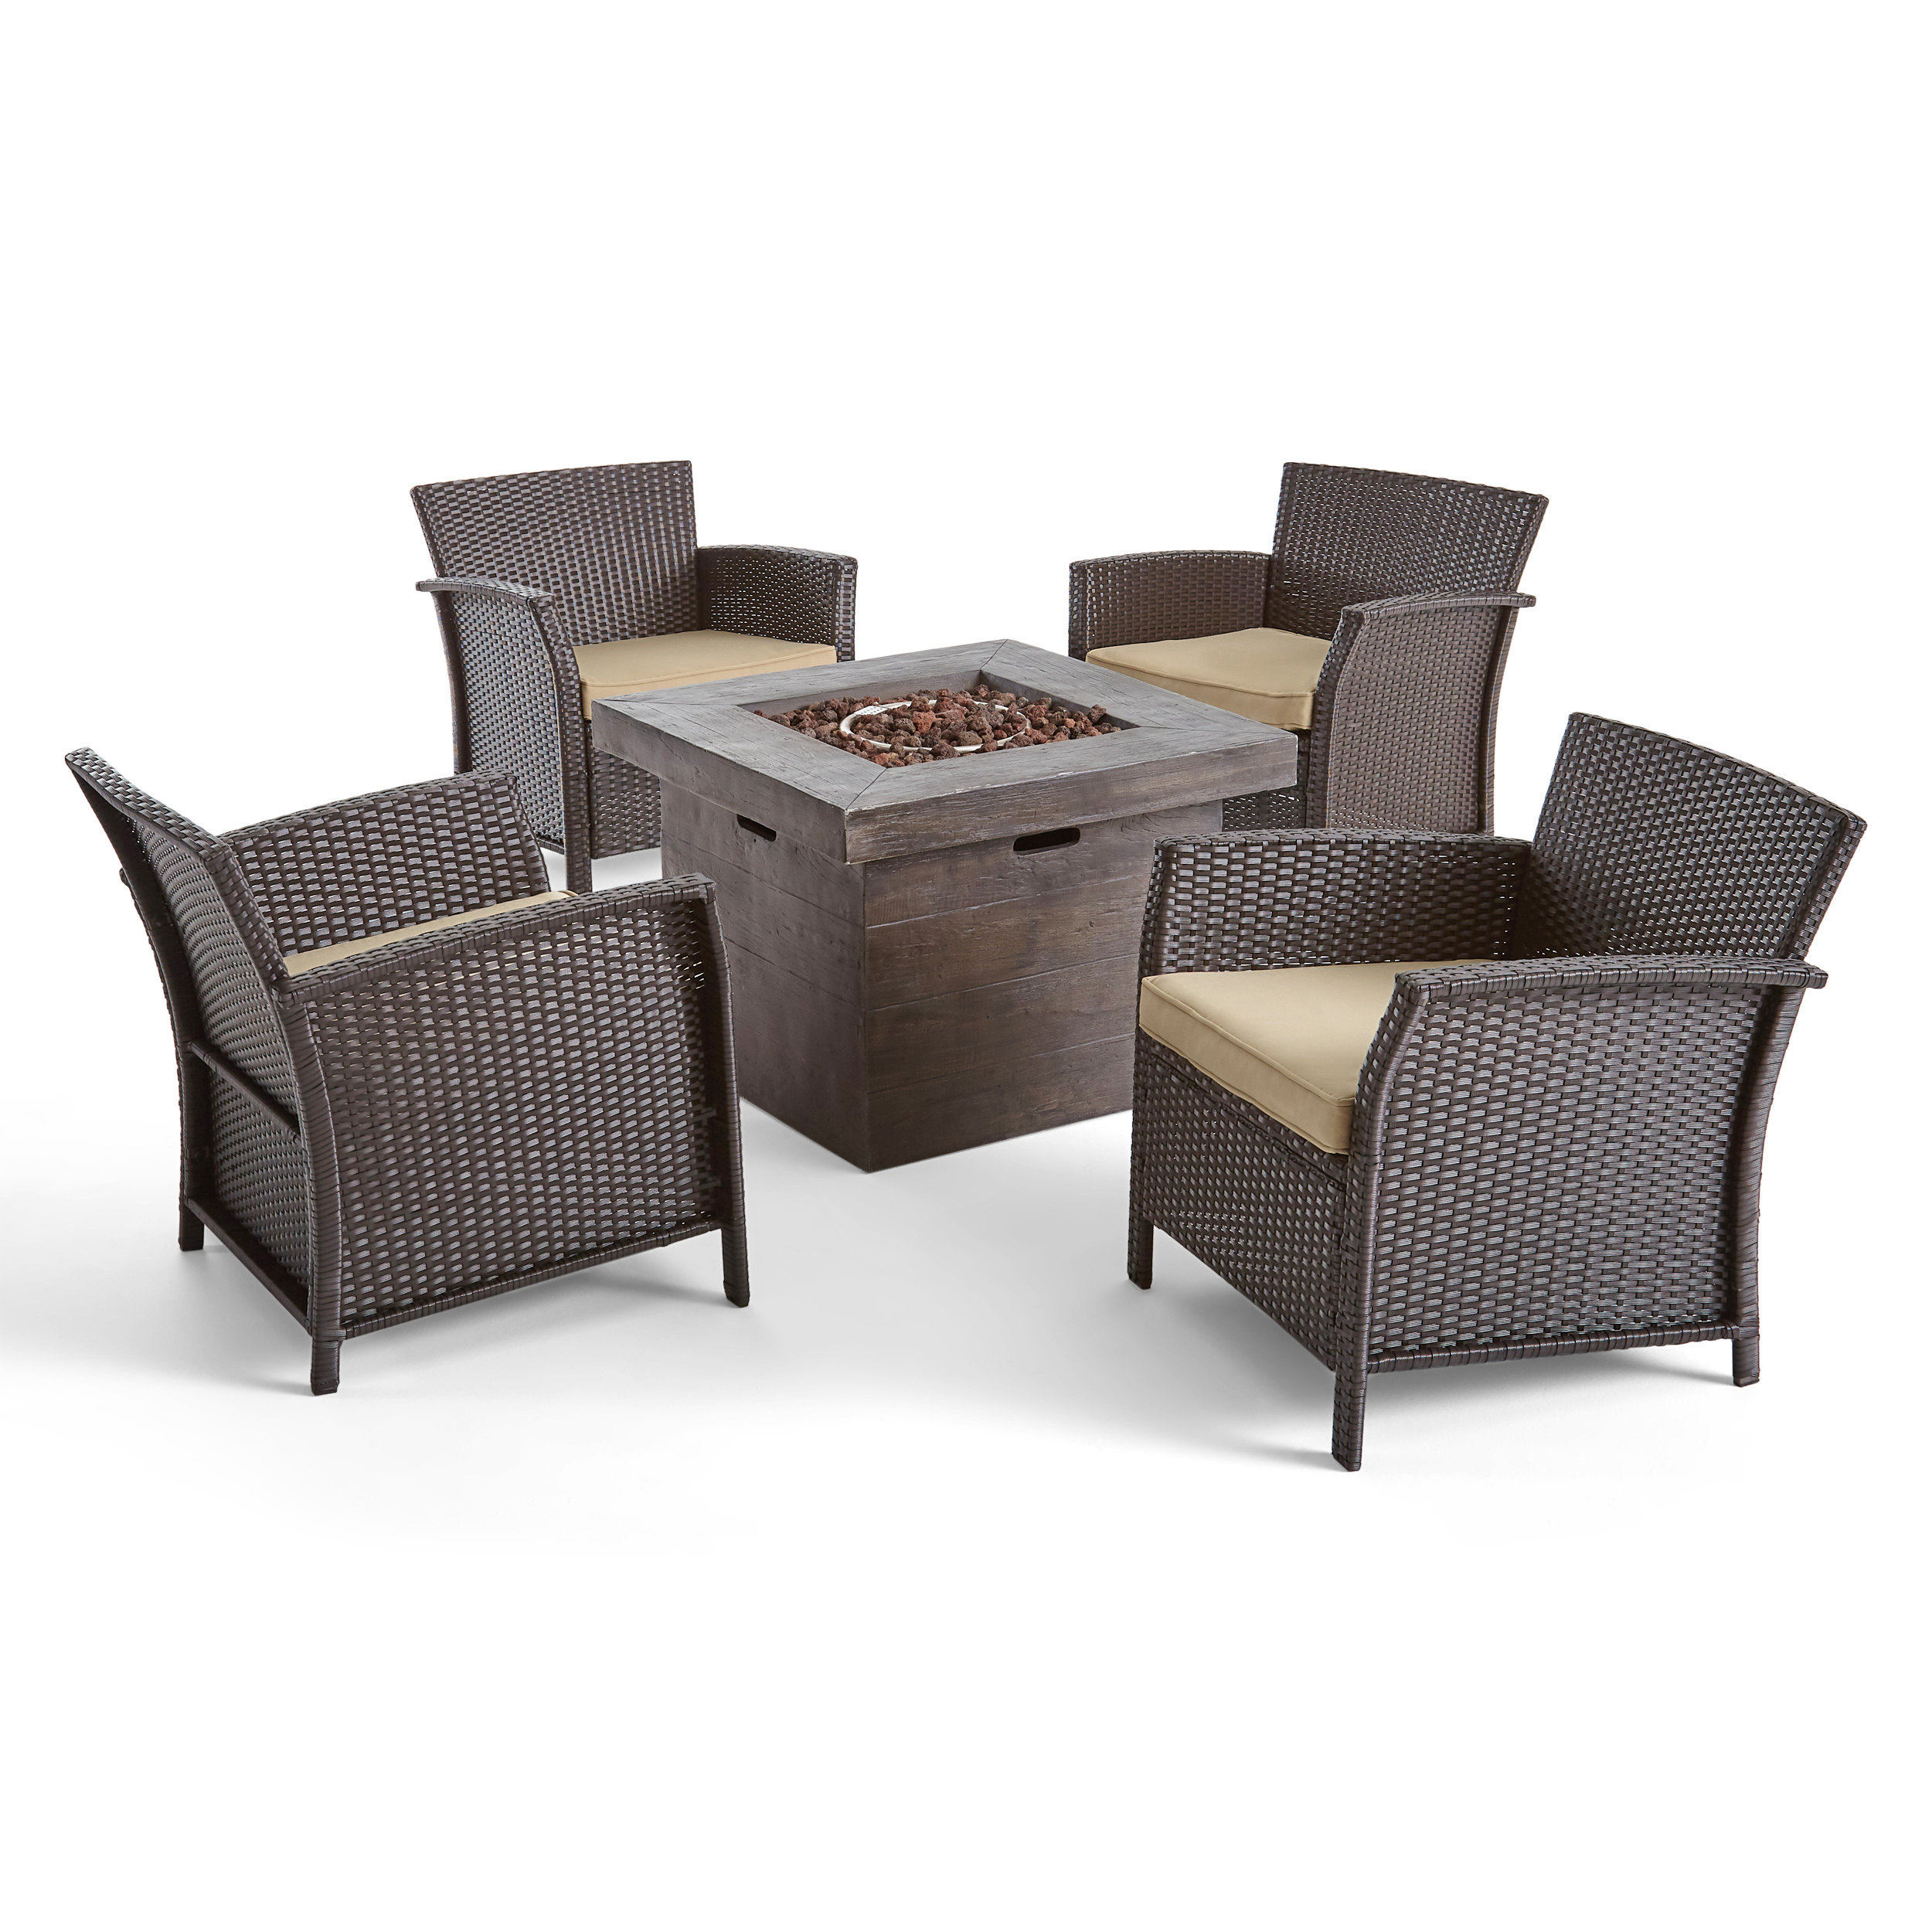 Anton Outdoor 5 Piece Wicker Chat Set with Cushions and Square Fire Pit, Brown, Tan, Brown - image 1 of 19